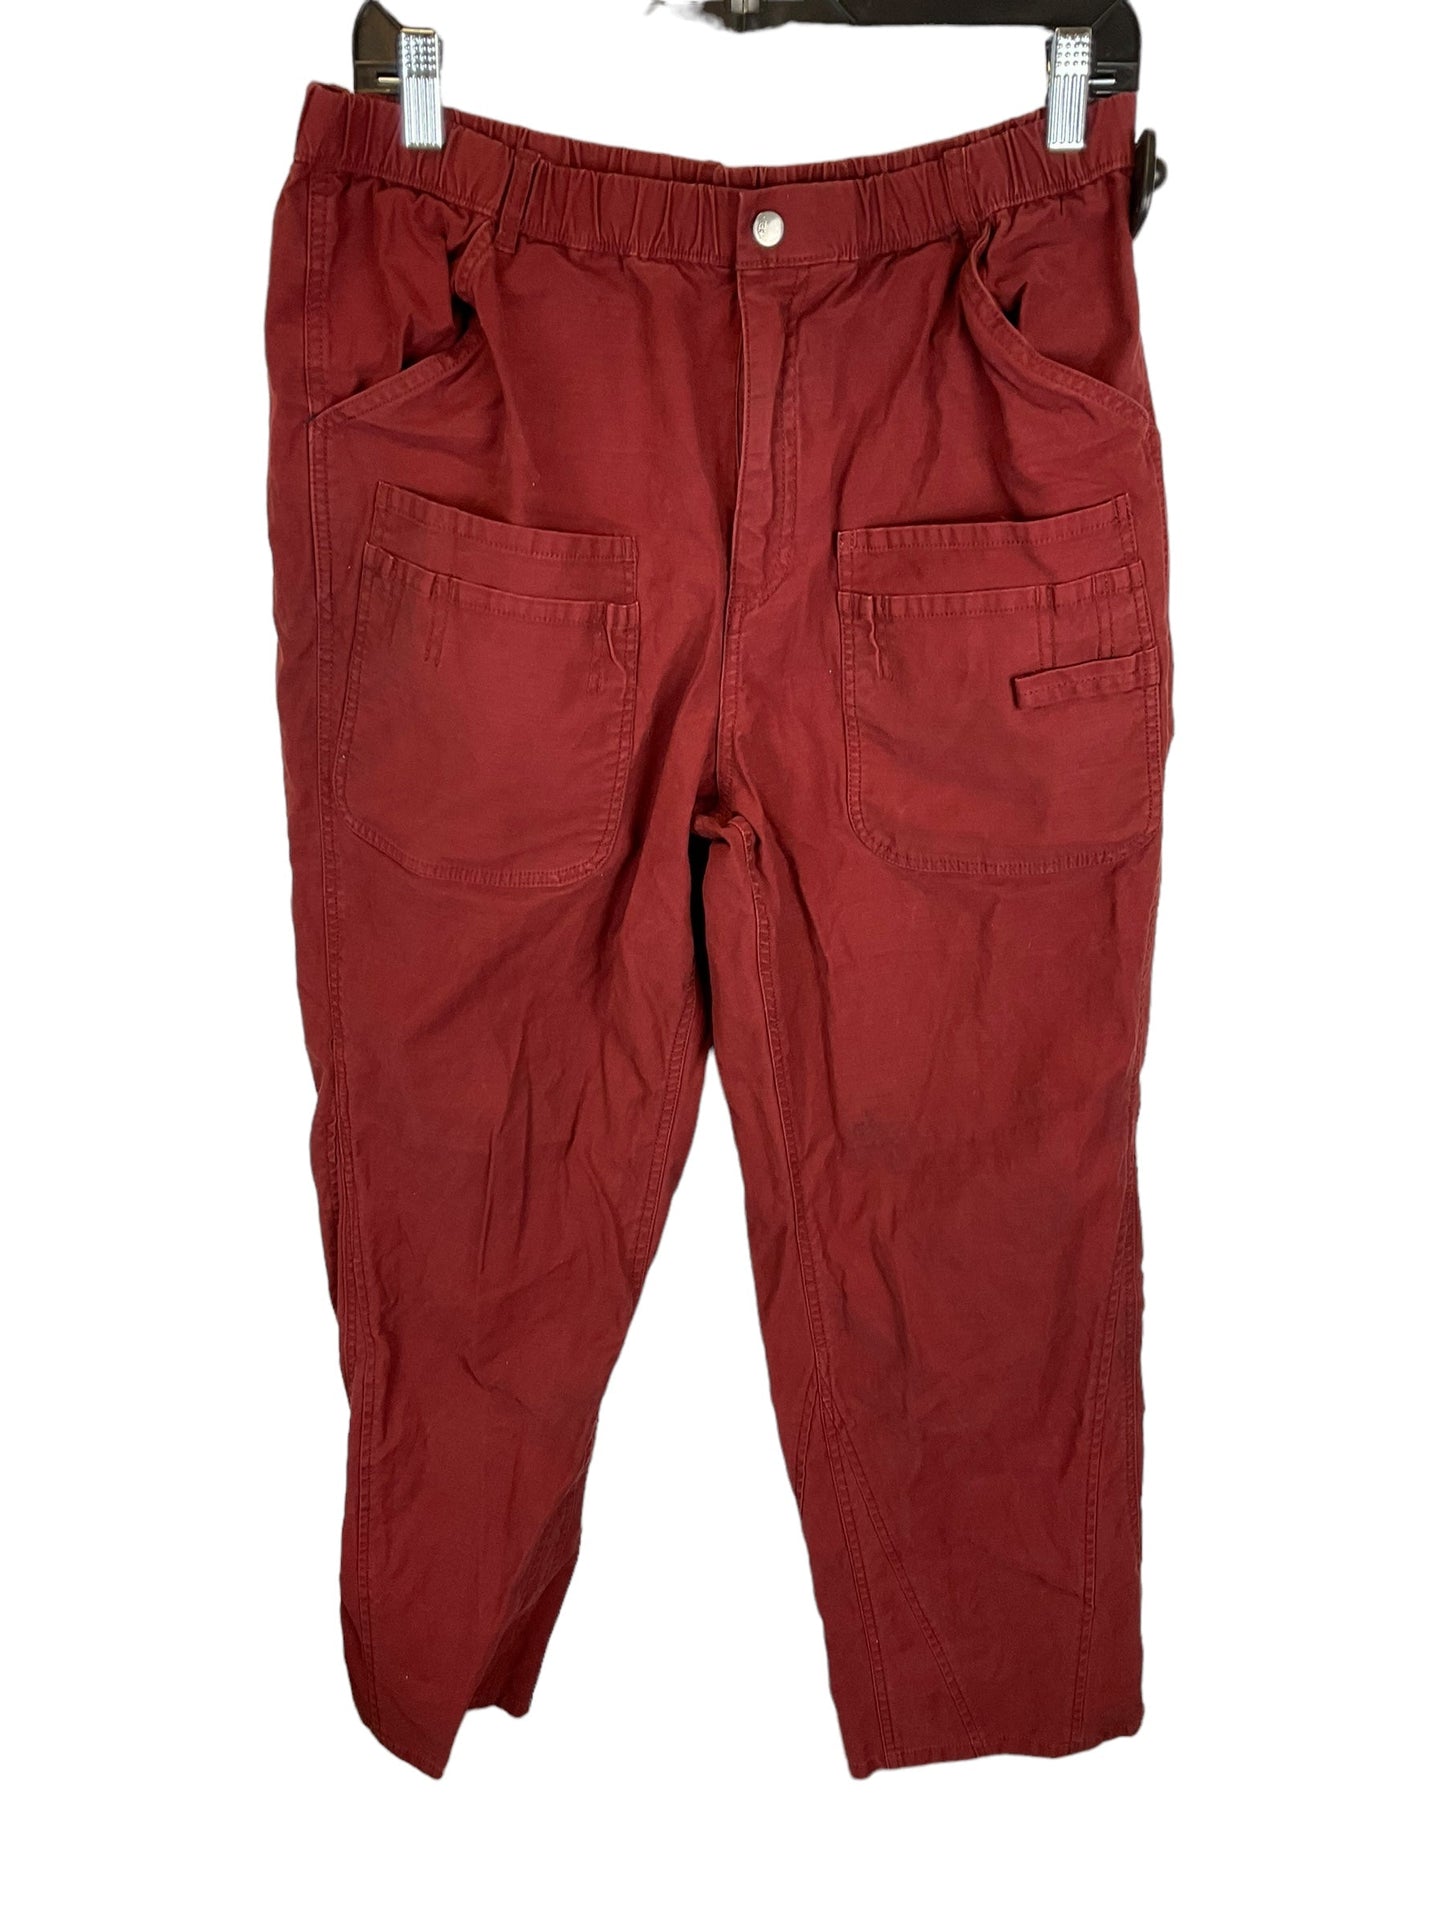 Red Pants Cargo & Utility Free People, Size L